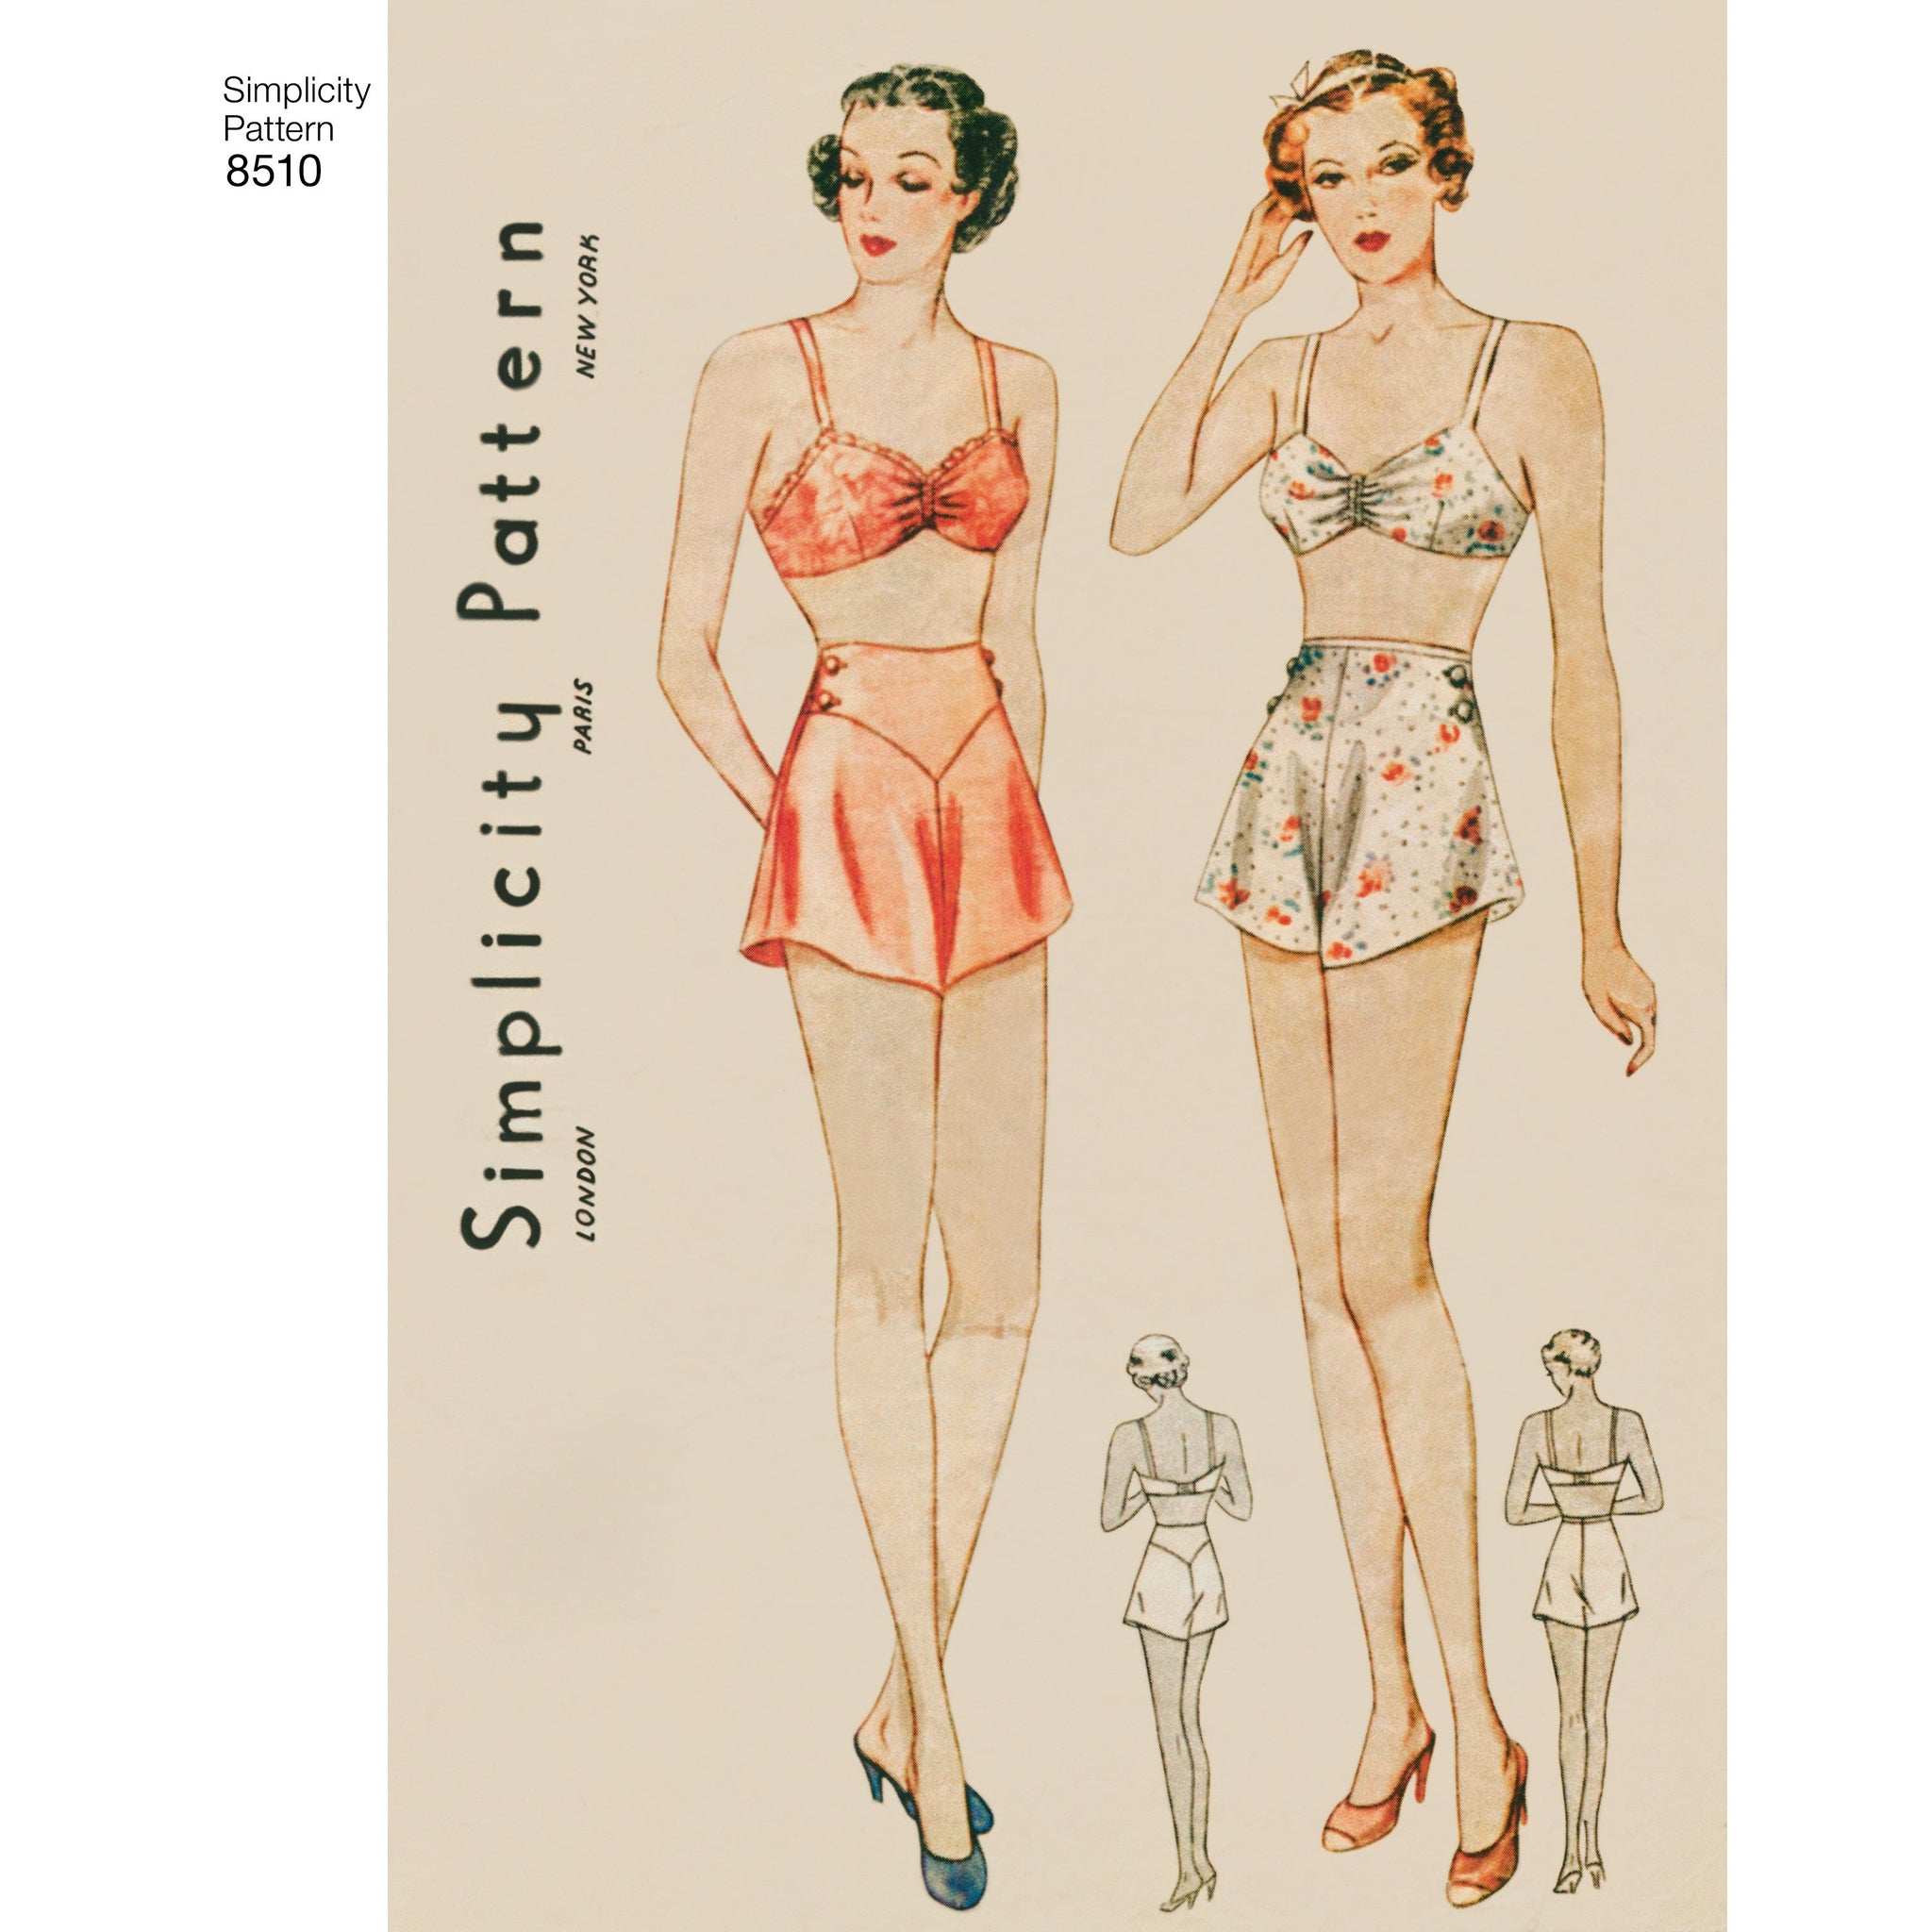  Simplicity 5905 1900-1910 Undergarment Pattern : Arts, Crafts &  Sewing